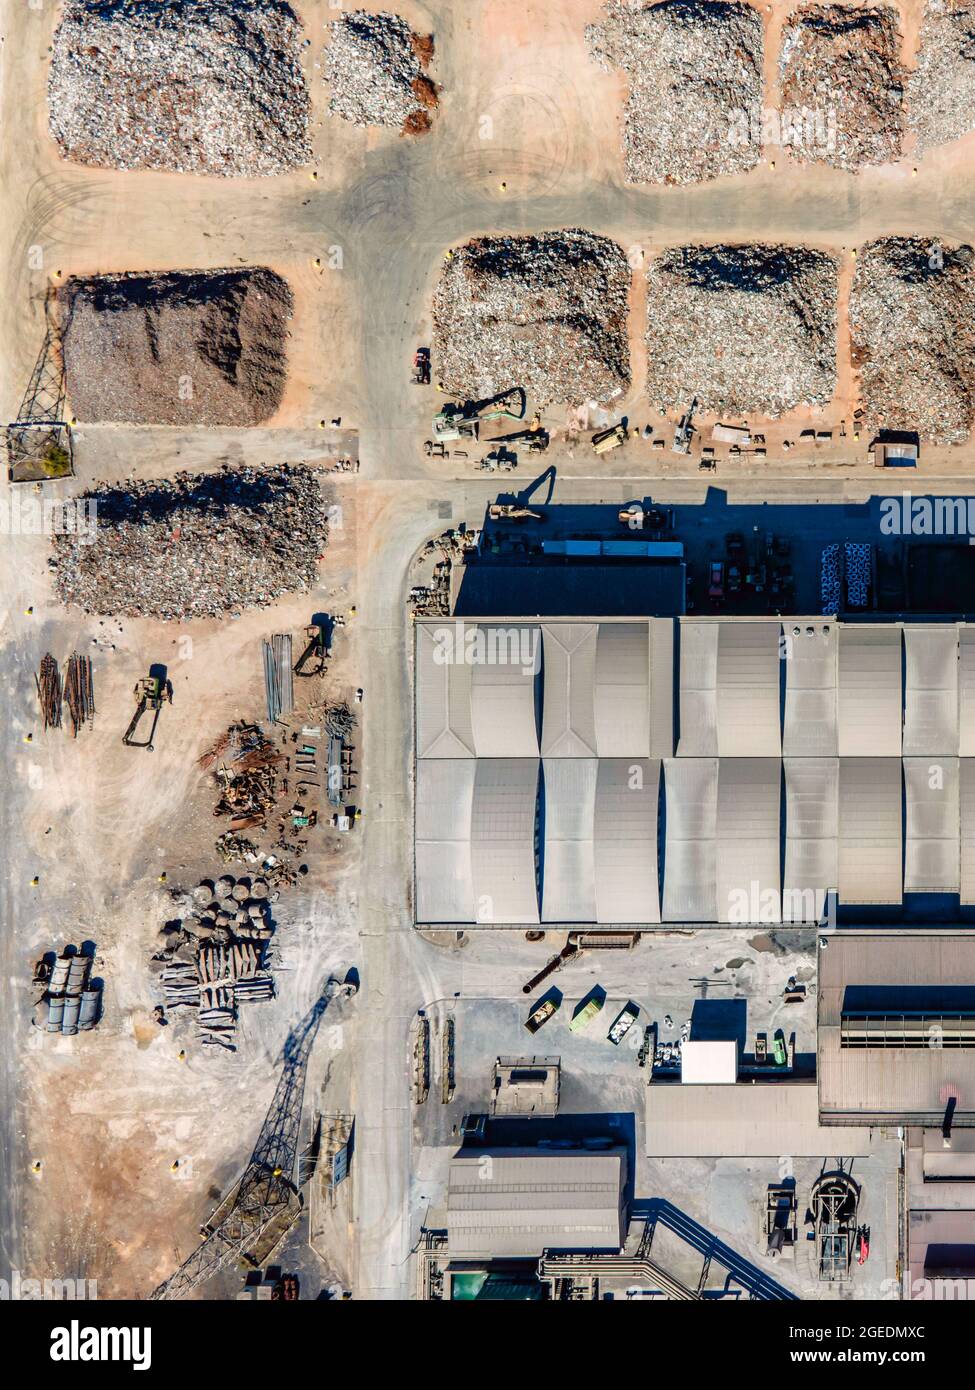 Aerial view of a giant construction and recycling site at Ecometais in Setubal, Portugal Stock Photo